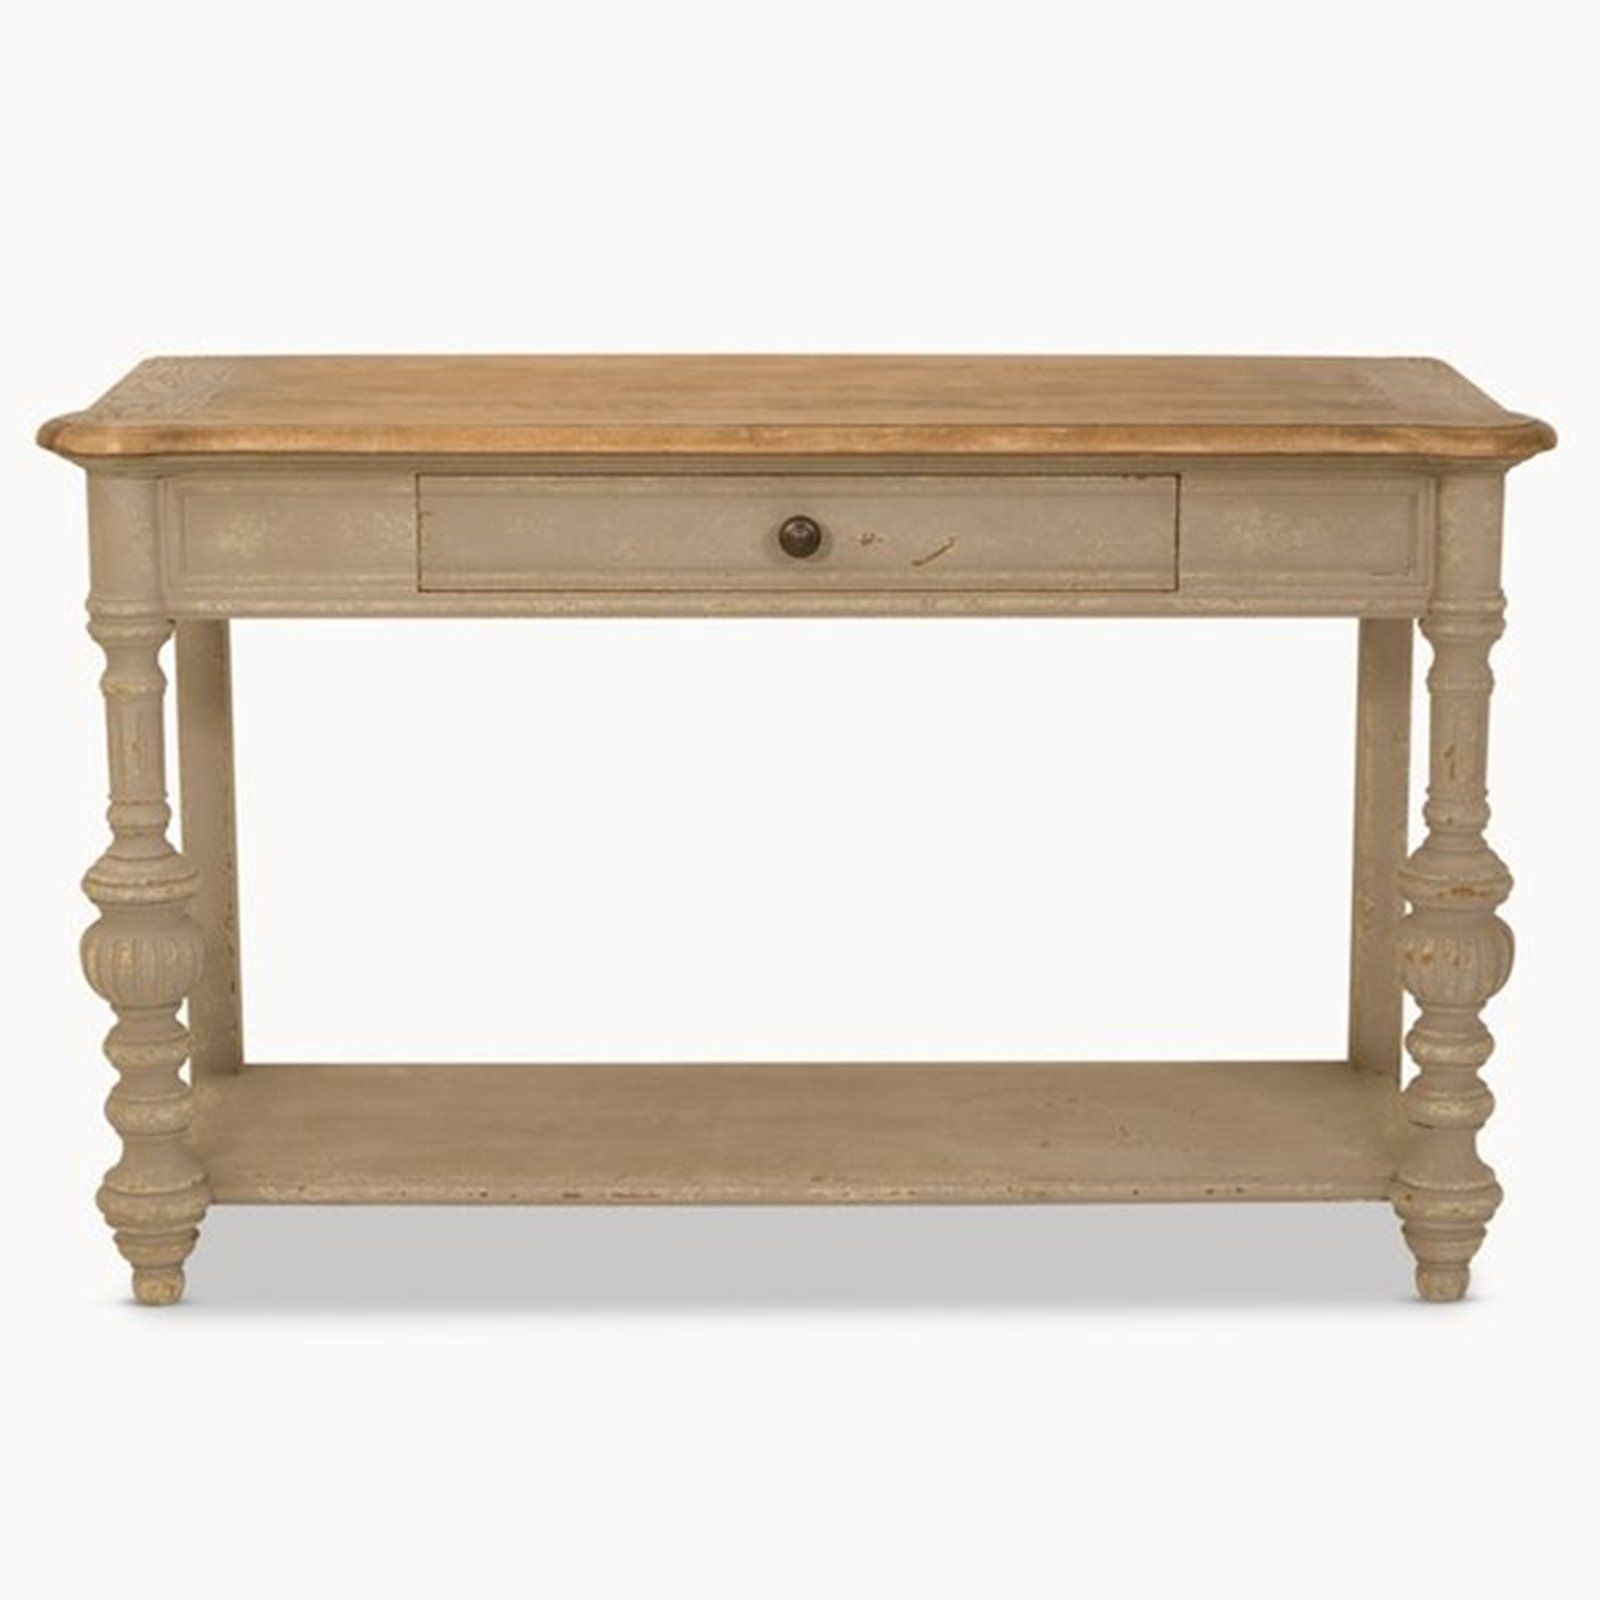 Colonial Grey Vintage Oak Console Table Pertaining To Famous Vintage Gray Oak Coffee Tables (View 9 of 20)